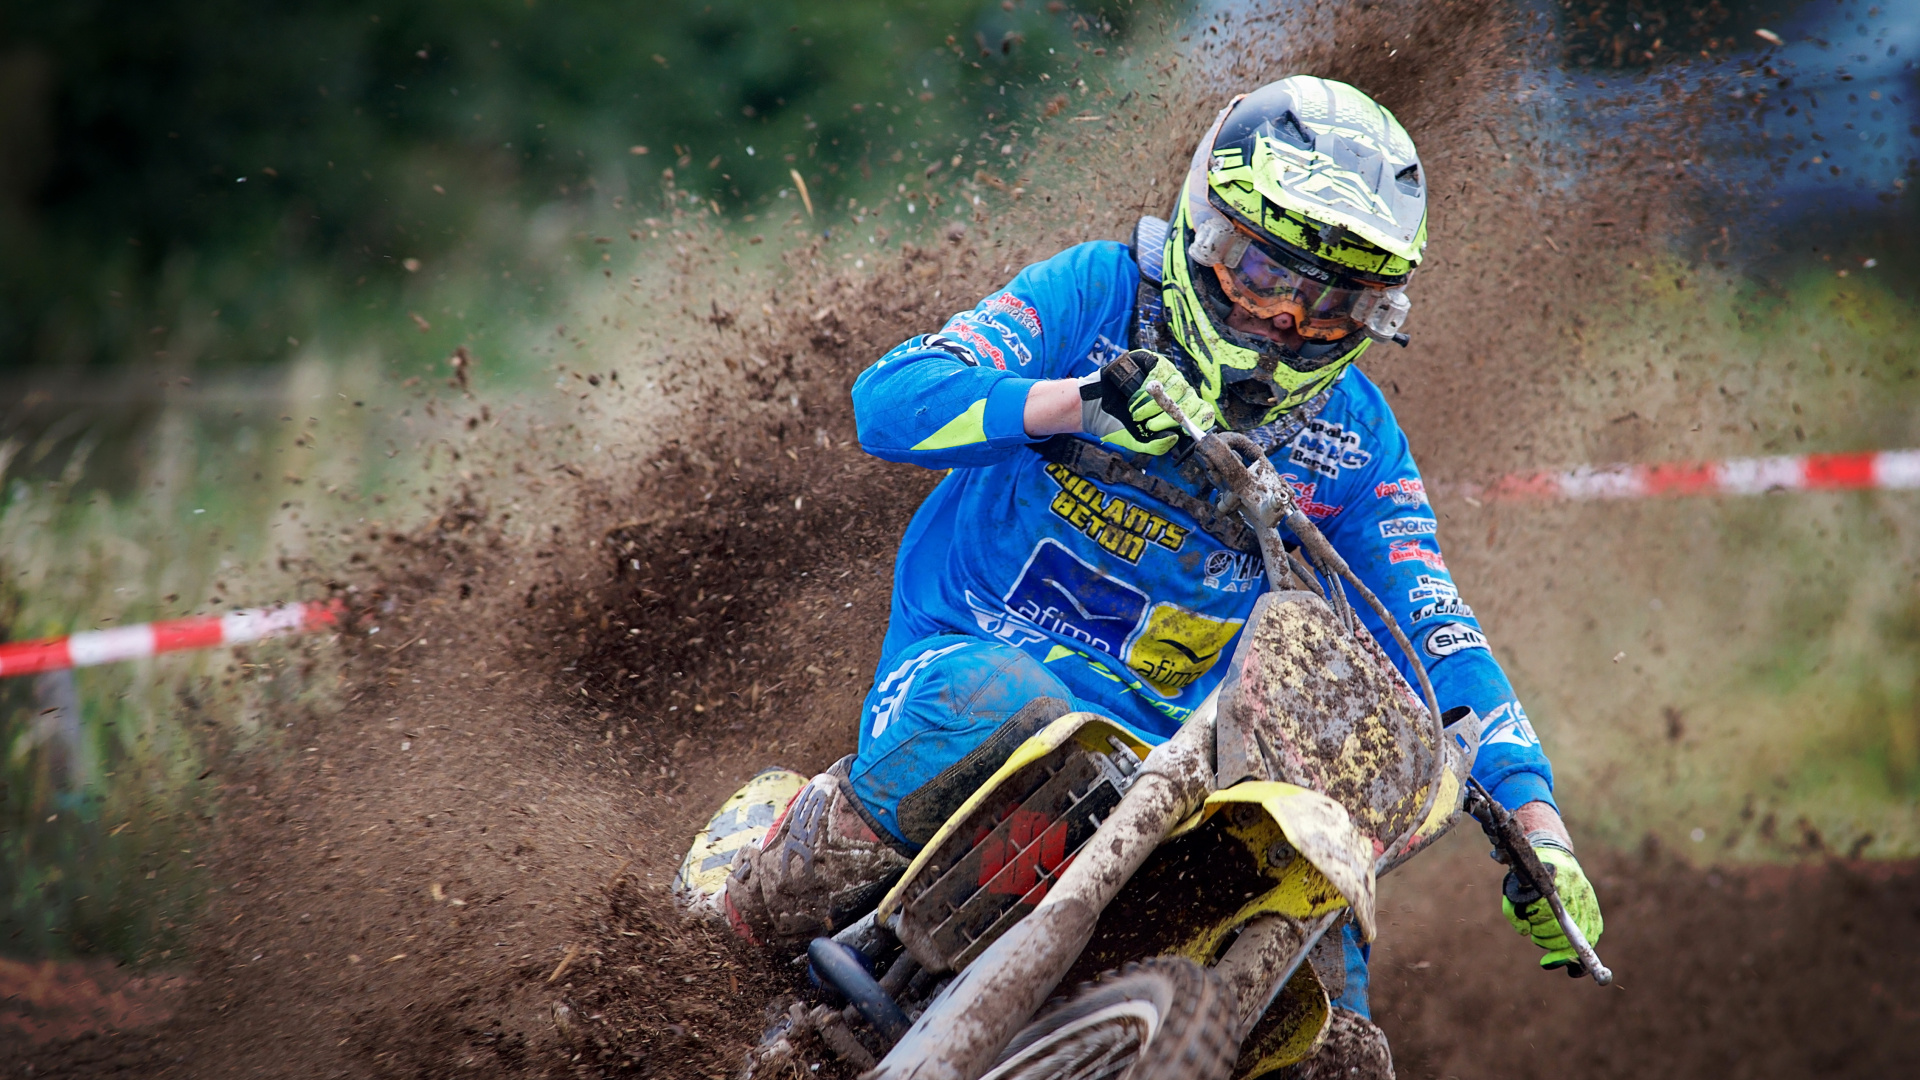 Man in Blue and Red Jacket Riding on Motocross Dirt Bike. Wallpaper in 1920x1080 Resolution